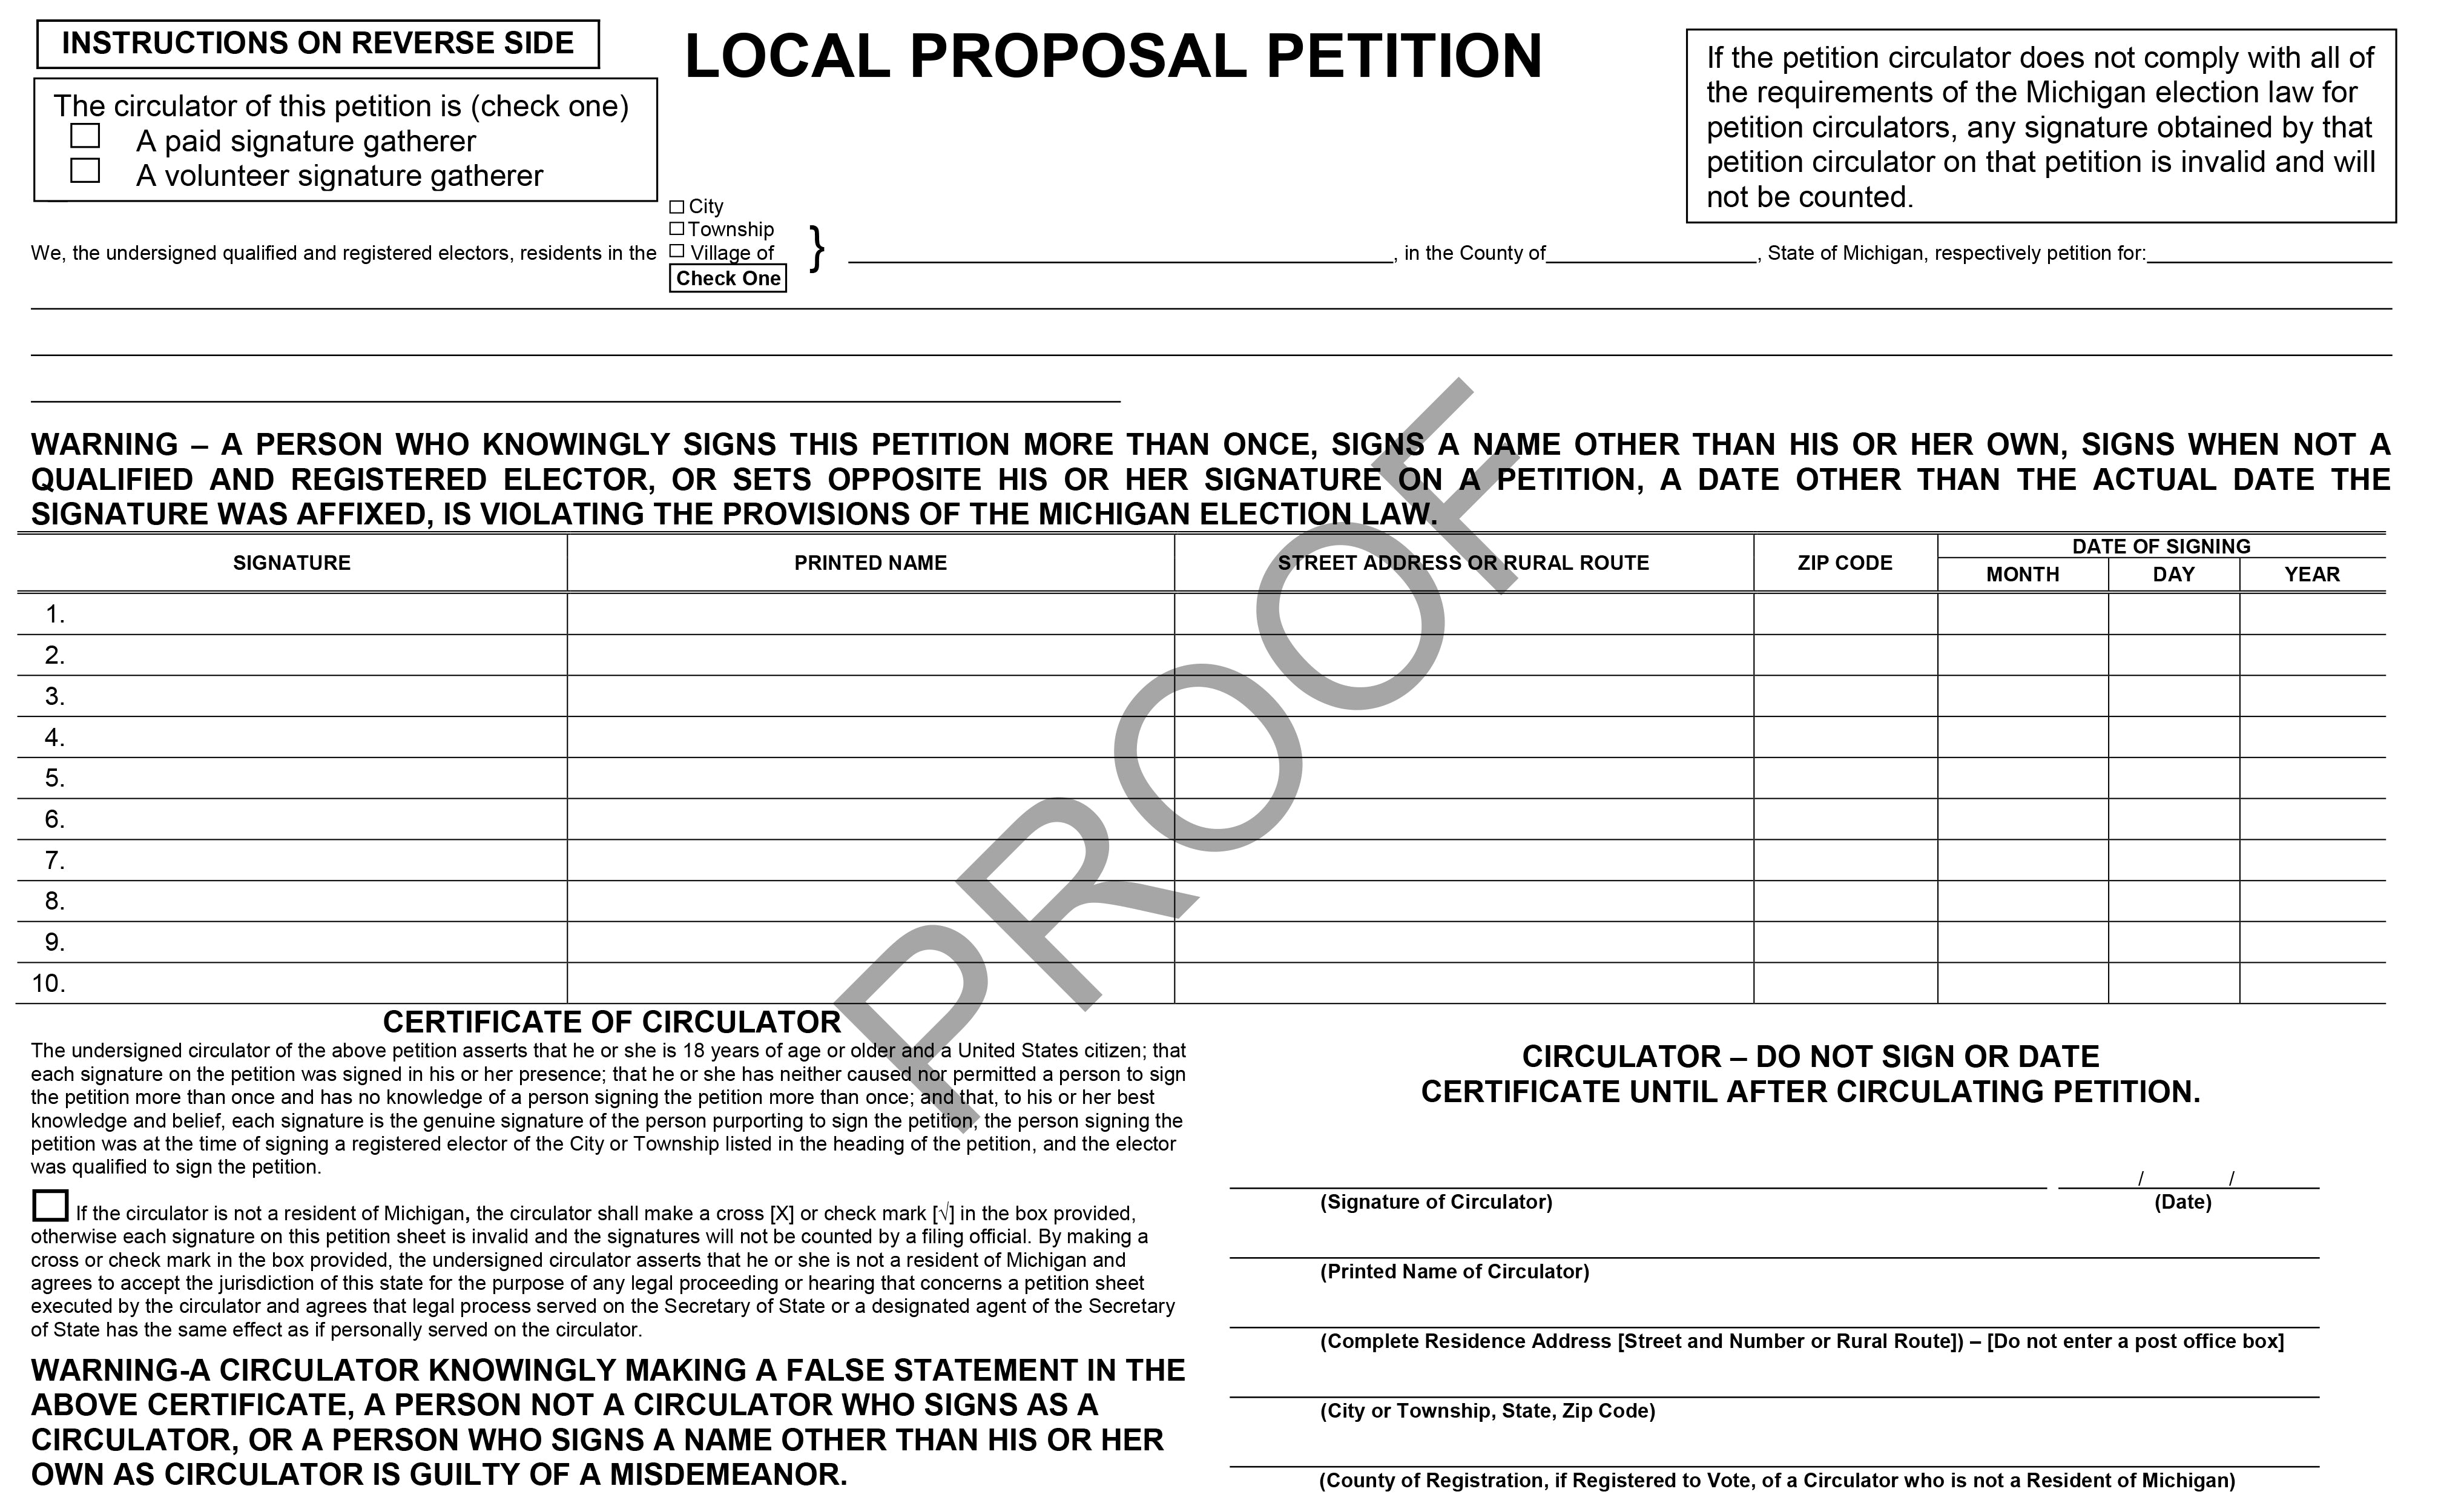 County-Local Proposal Petition